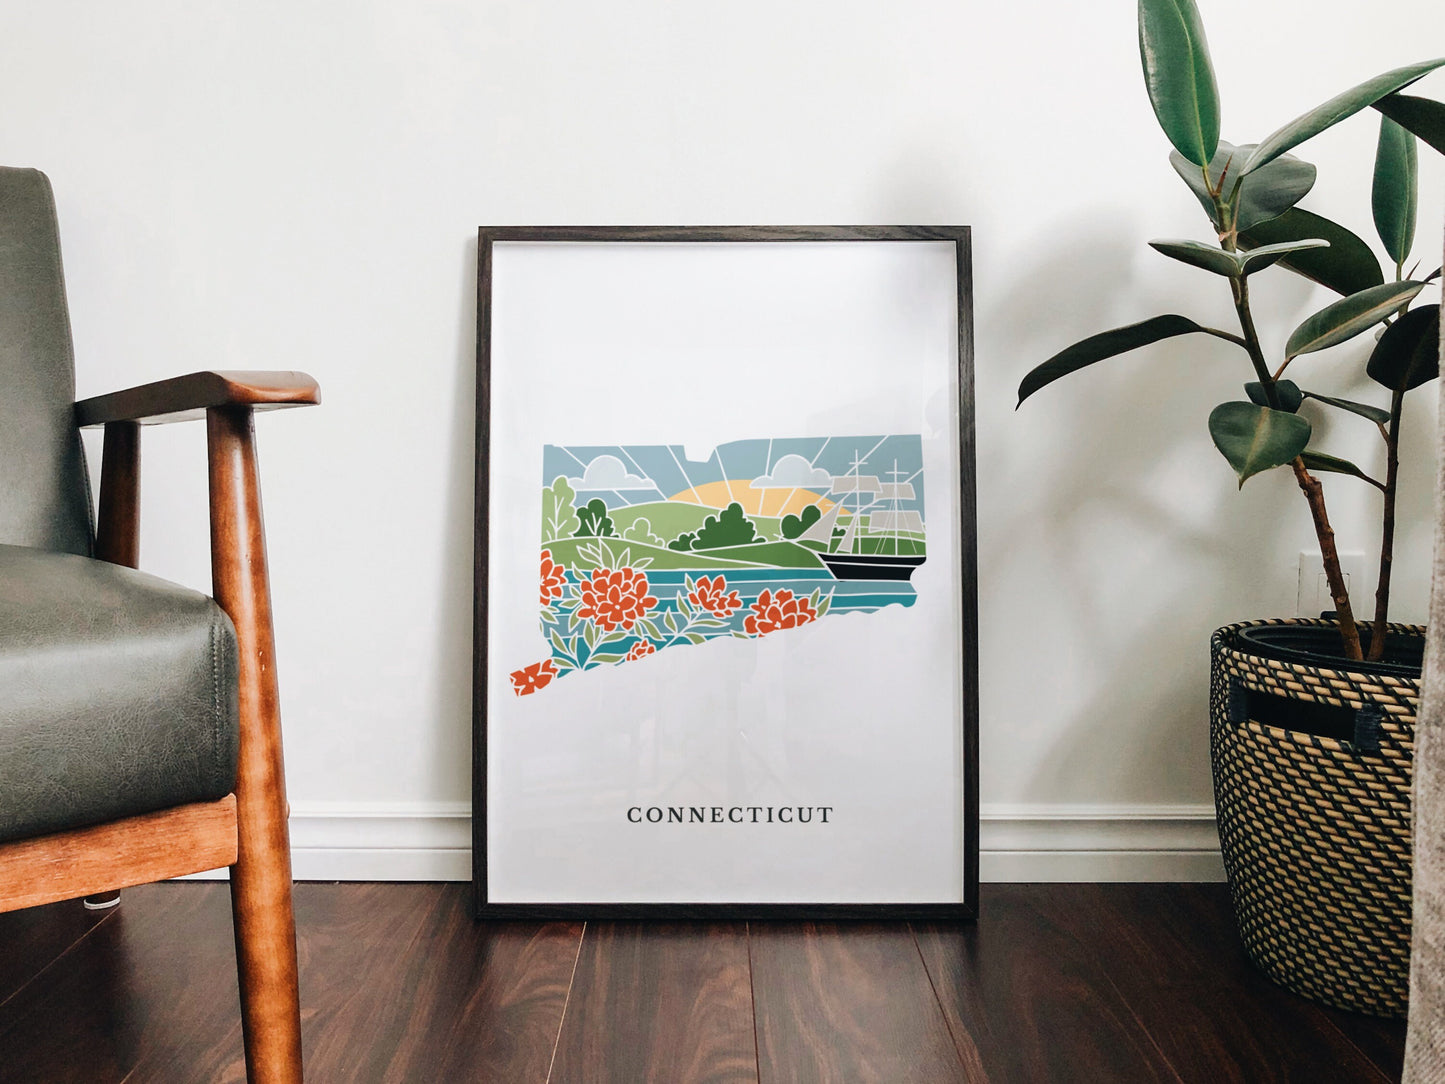 Connecticut Physical Art Print | State Wall Art | 5x7, 8x10, 11x14, 16x20 Archival Art Print | Connecticut Illustrated Poster